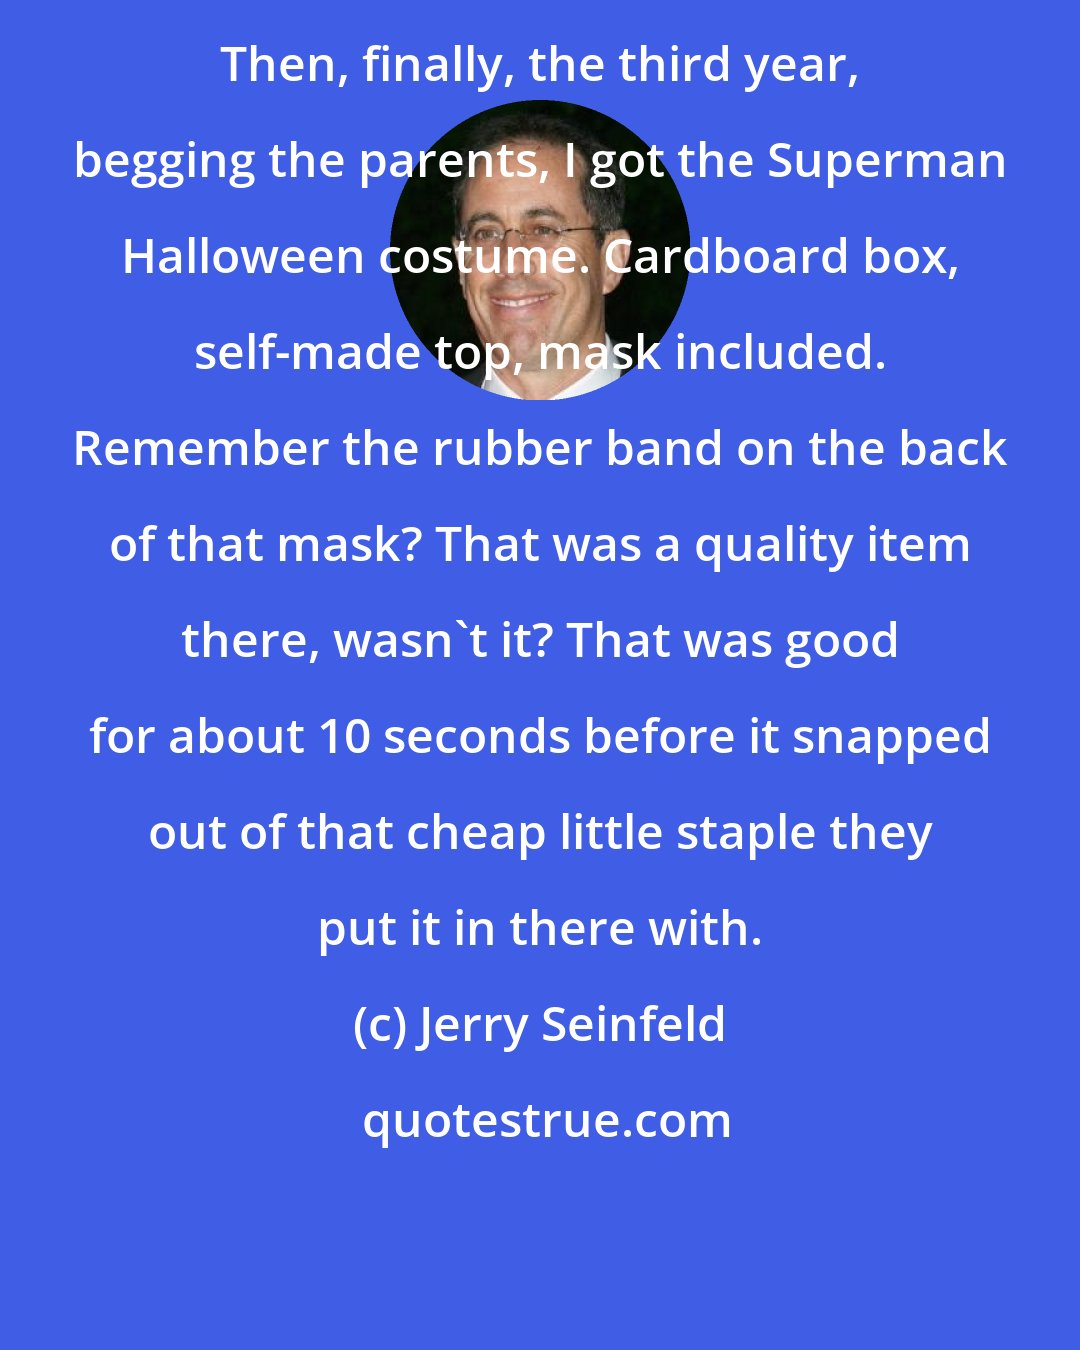 Jerry Seinfeld: Then, finally, the third year, begging the parents, I got the Superman Halloween costume. Cardboard box, self-made top, mask included. Remember the rubber band on the back of that mask? That was a quality item there, wasn't it? That was good for about 10 seconds before it snapped out of that cheap little staple they put it in there with.